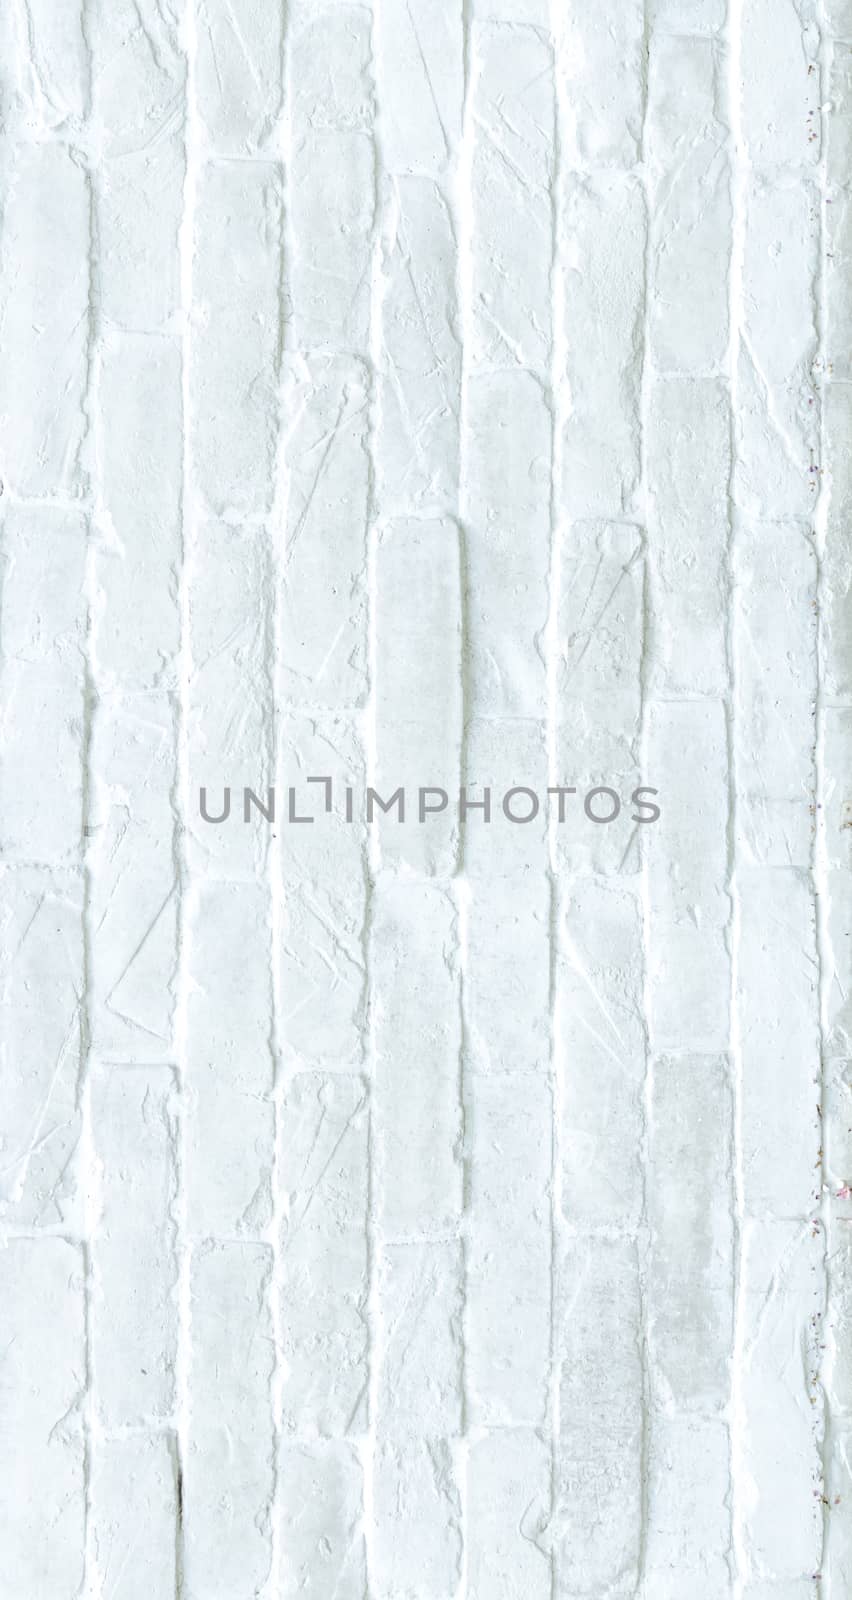 A white brick wall background and texture.